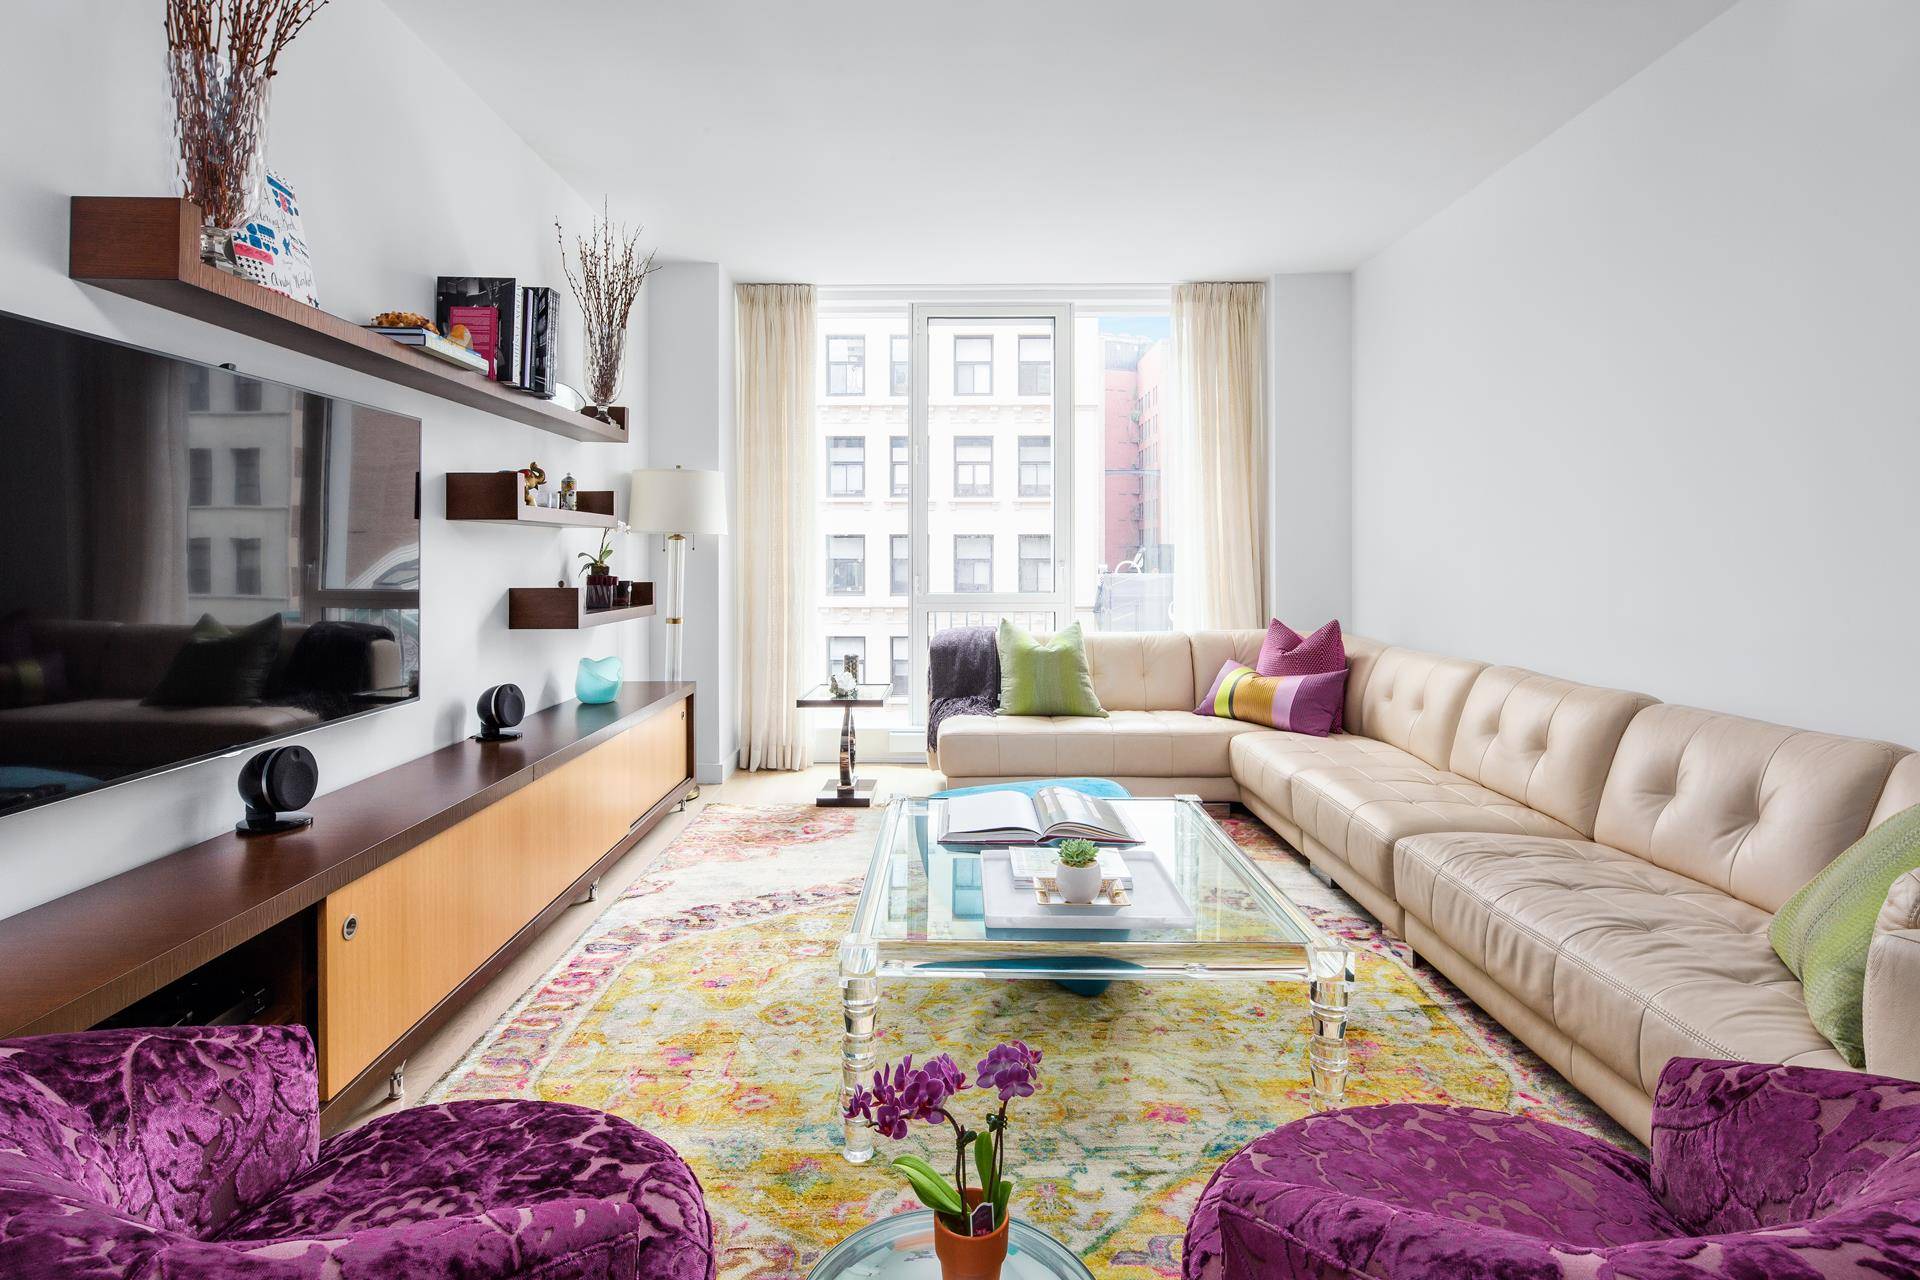 Located just one block from Madison Square Park in Nomad, this beautiful apartmemt is move in ready.